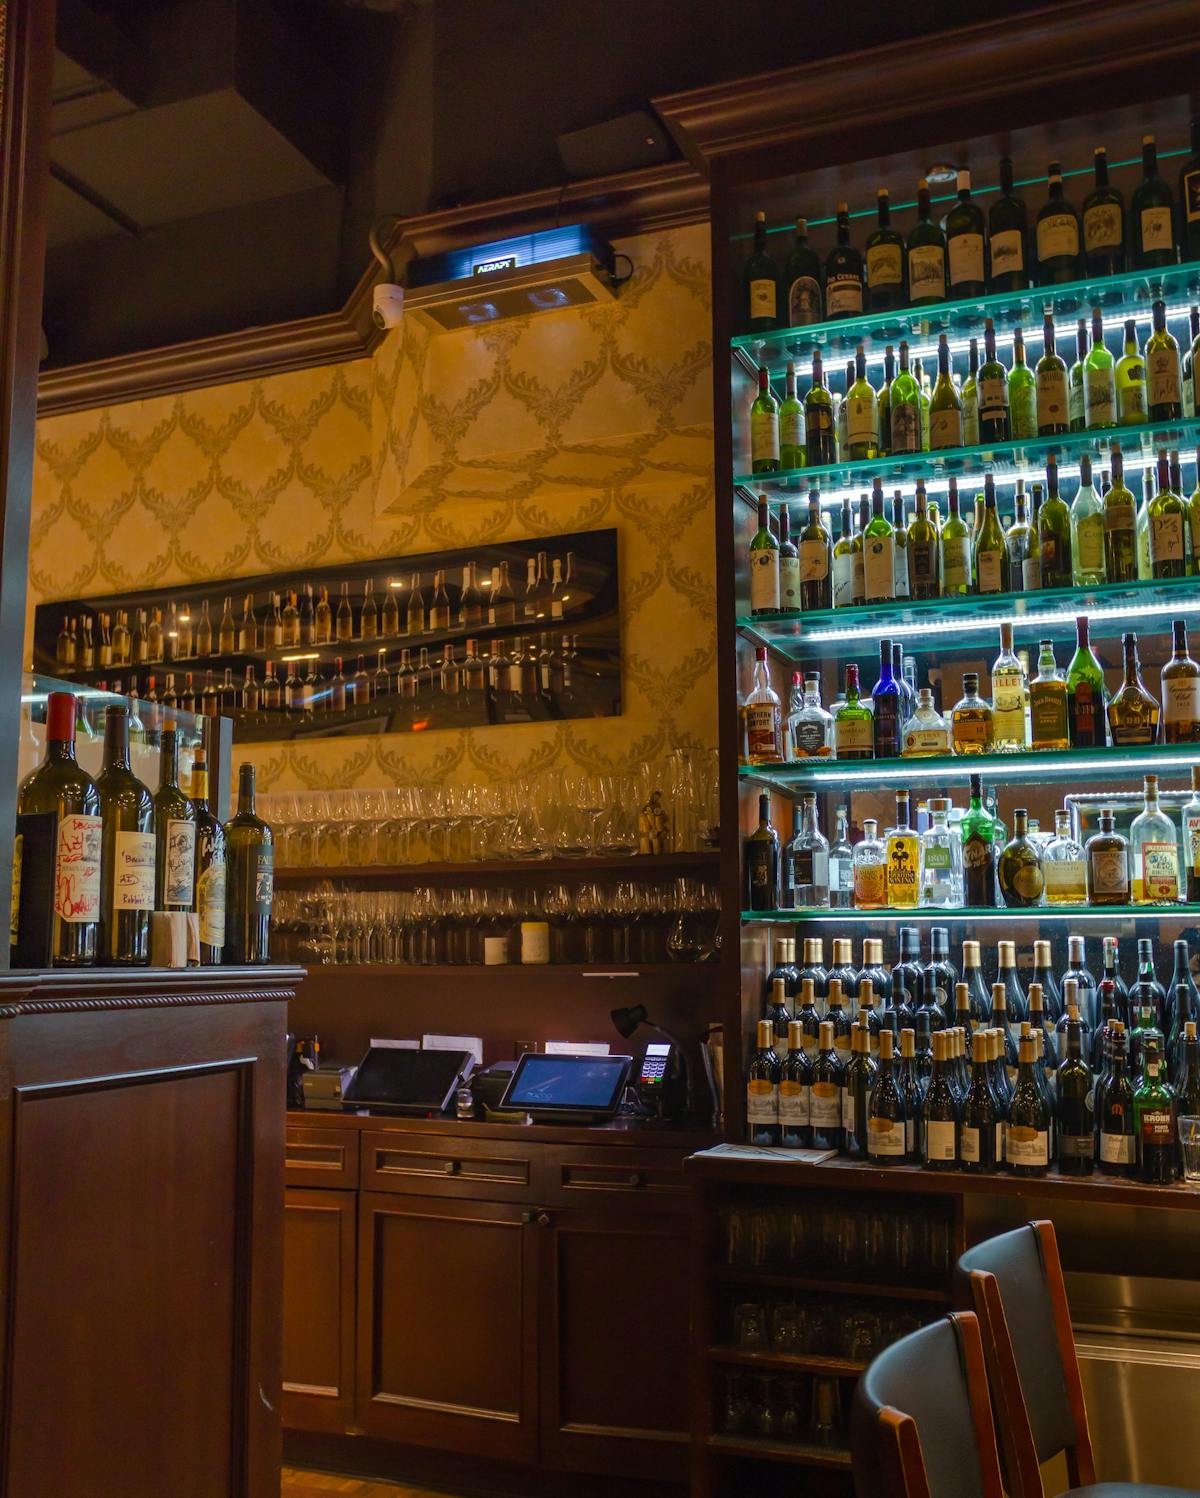 FIG. 2. A wall-mounted Aerapy upper-air system provides 180&deg; of protection in the bar area of Rocco Steakhouse. (Photo credit: Image courtesy of Aerapy.)